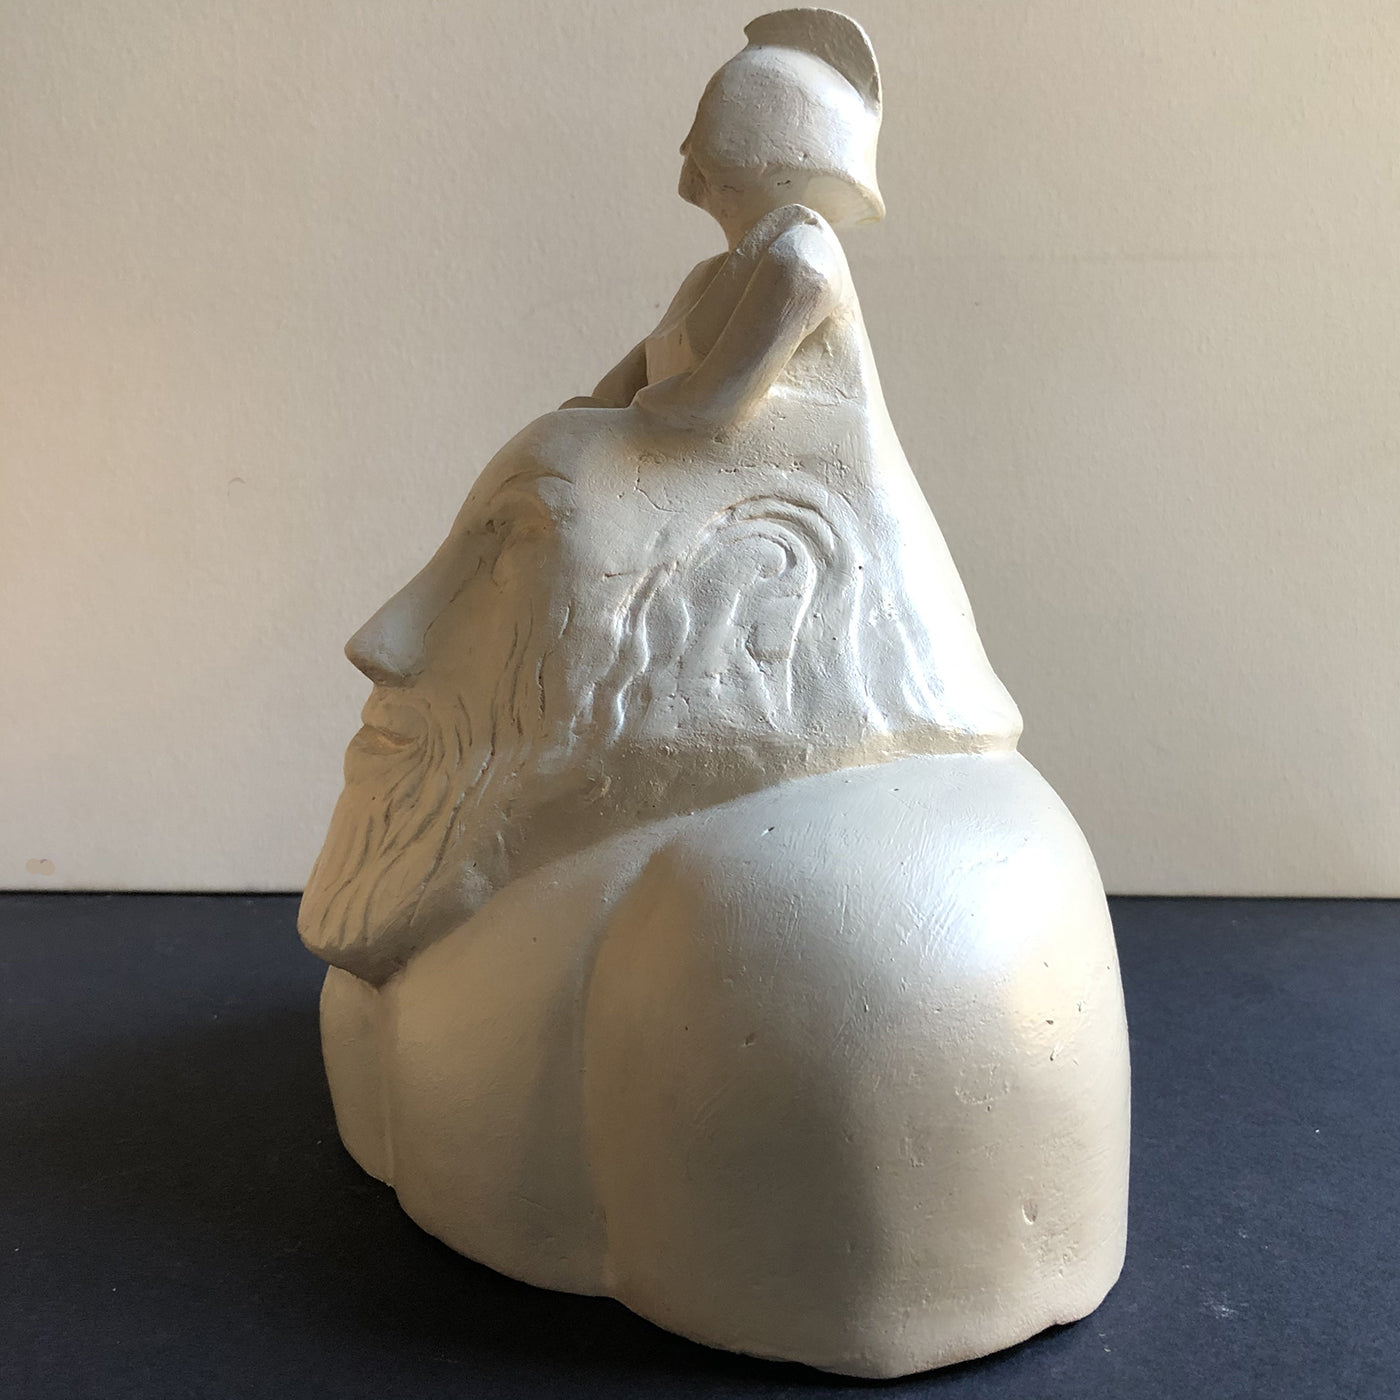 The birth of Athena from the head of Zeus Sculpture - Alternative view 3